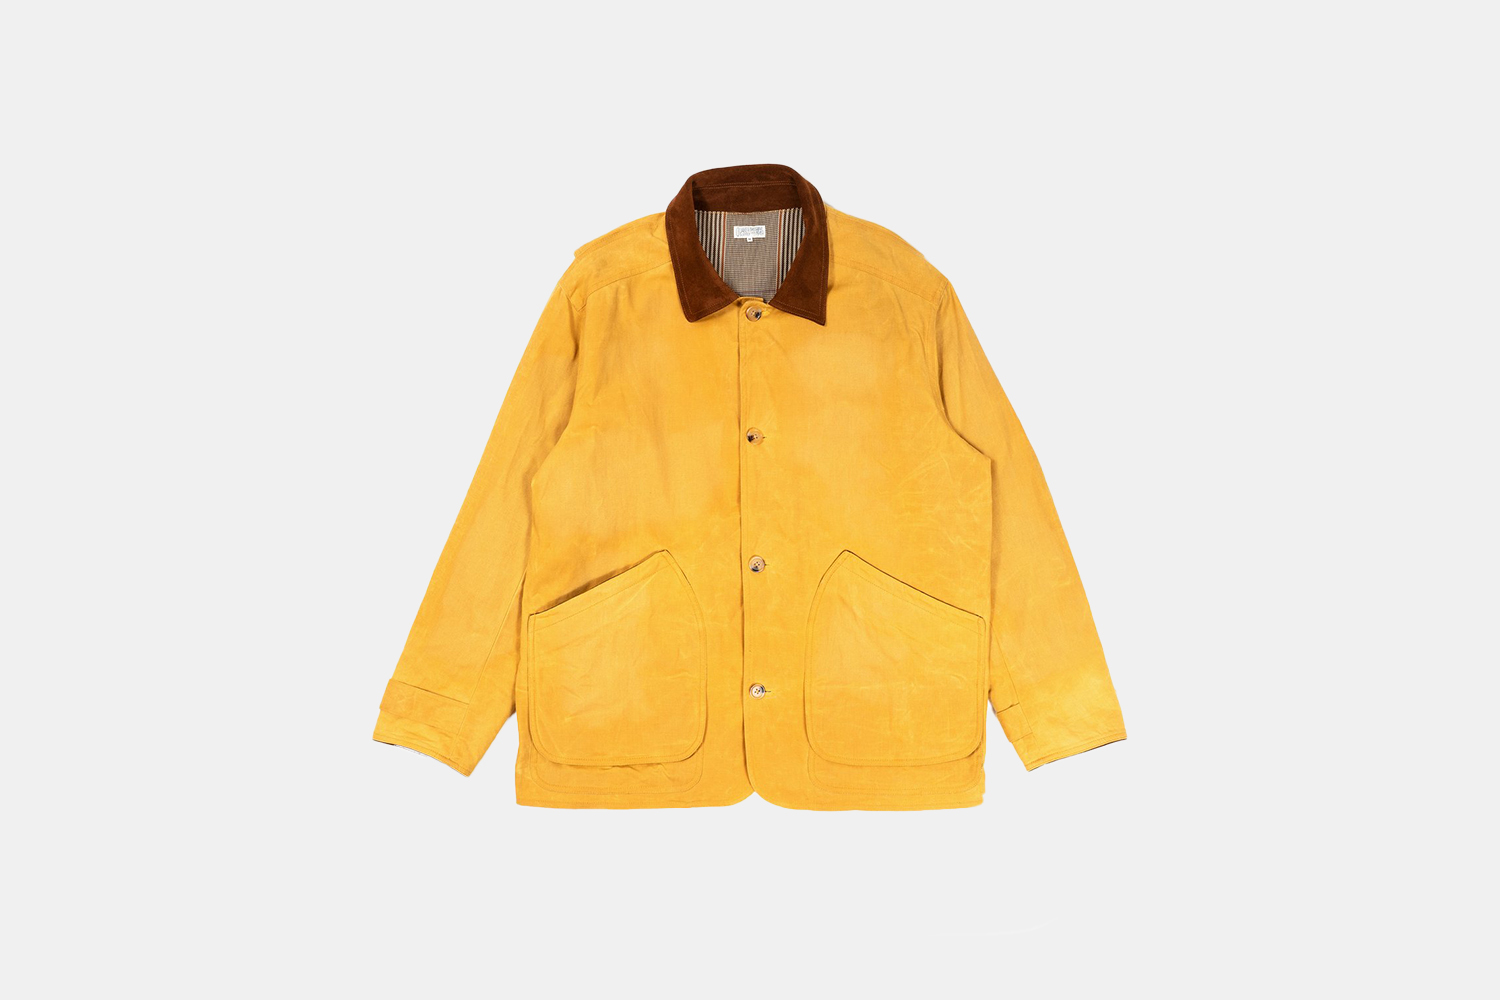 A yellow jacket with corduroy collar